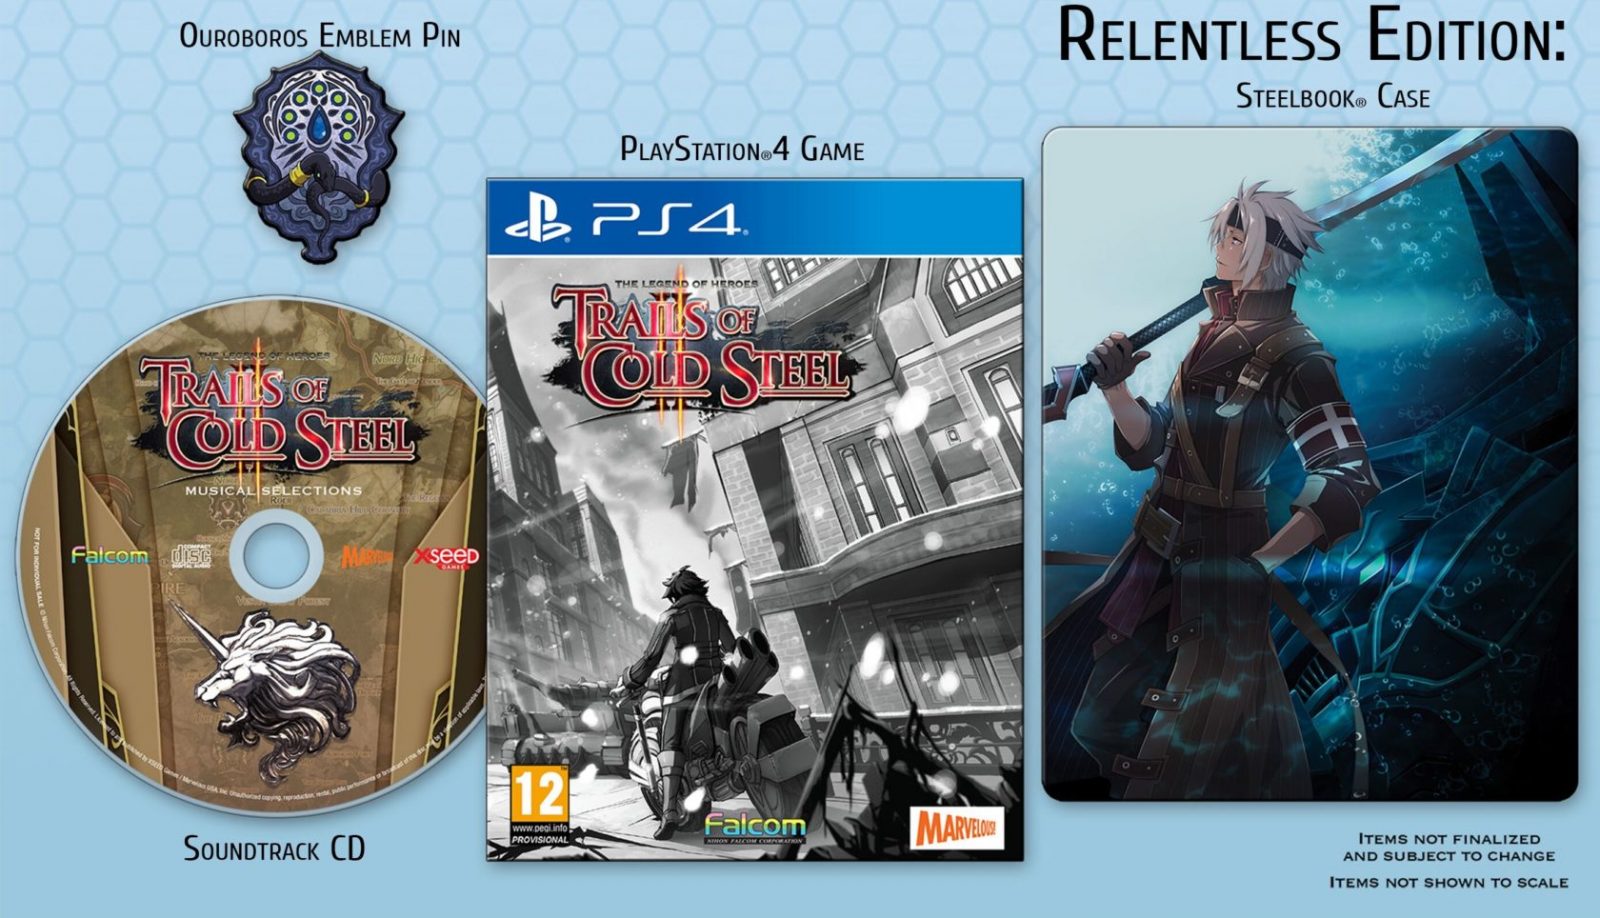 The Legend of Heroes: Trails of Cold Steel II Relentless Edition